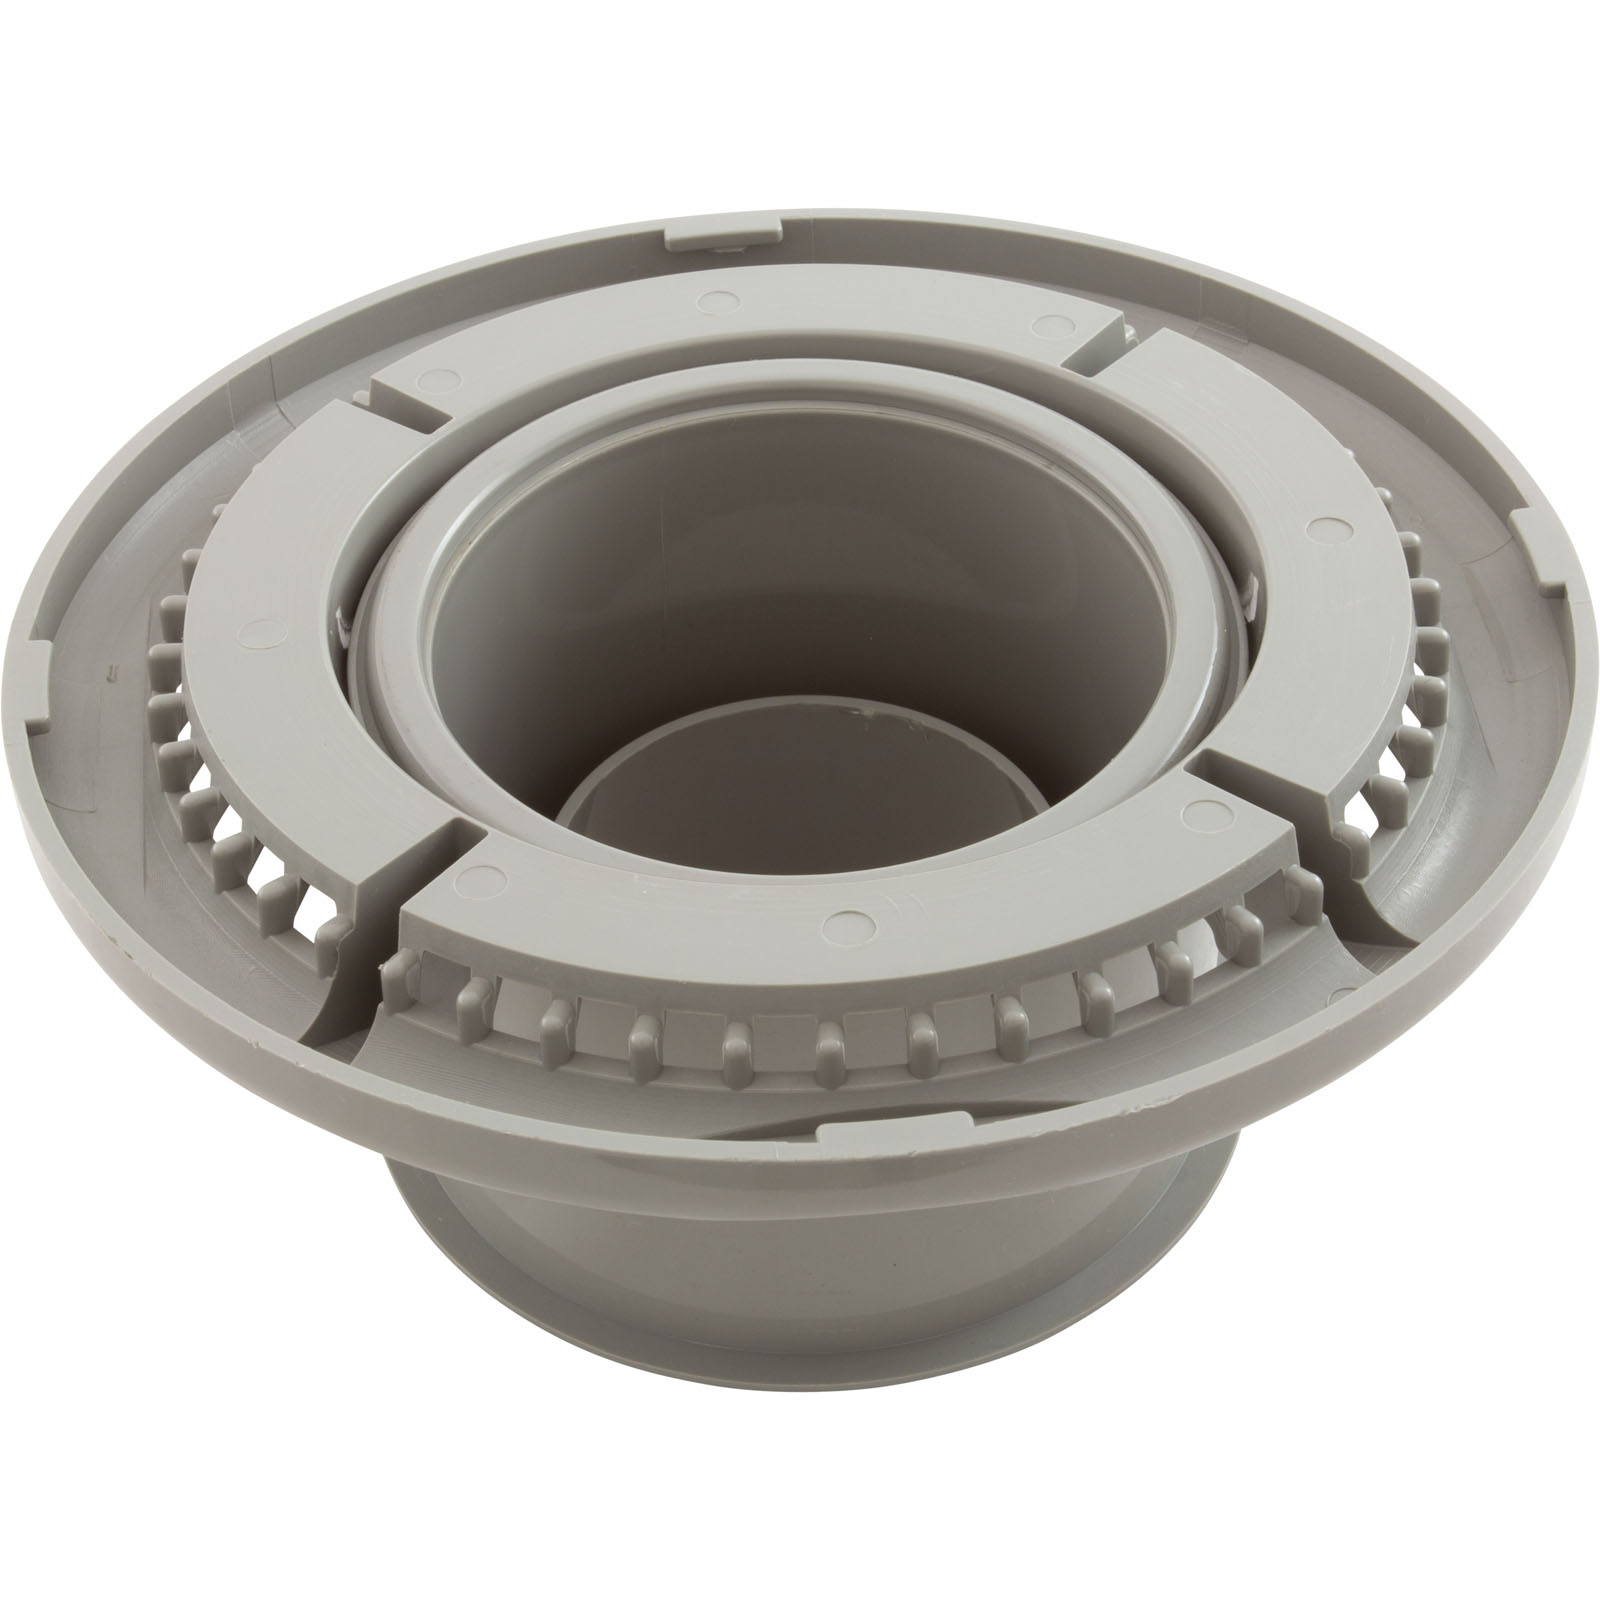 Picture of 25351-909-100 Cmp Weir And Lid Gray